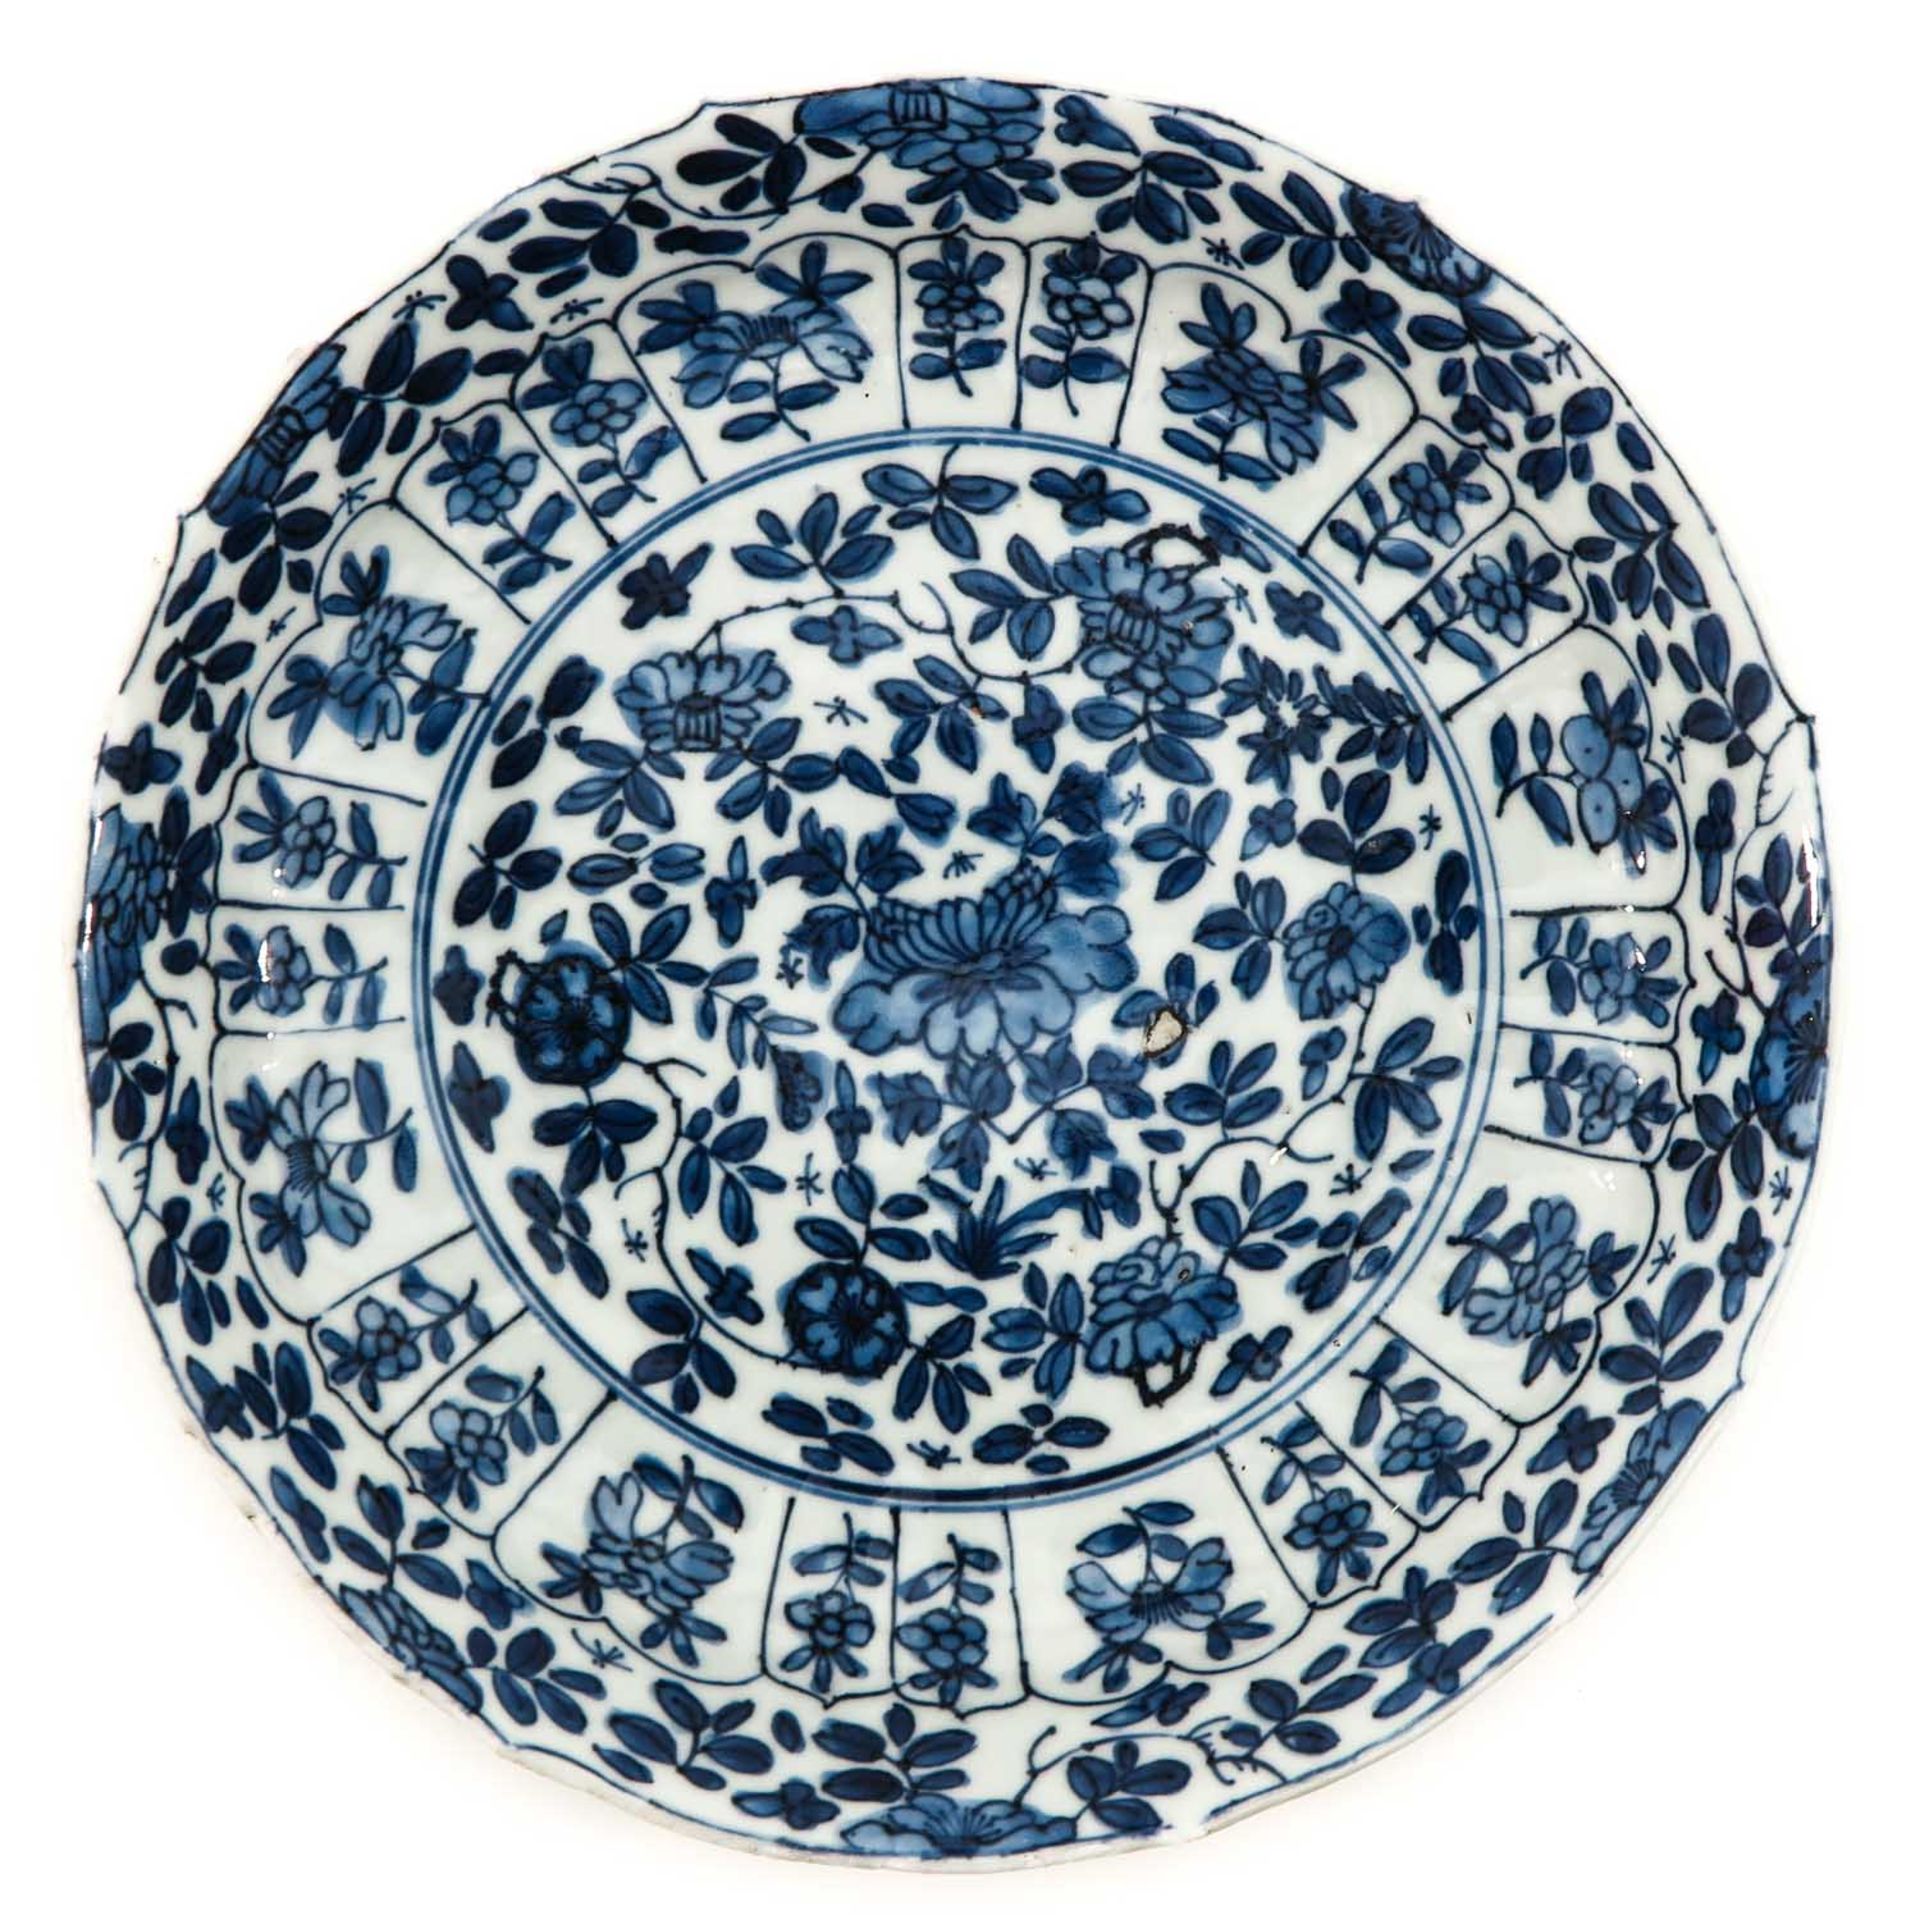 A Pair of Blue and White Plates - Image 5 of 10